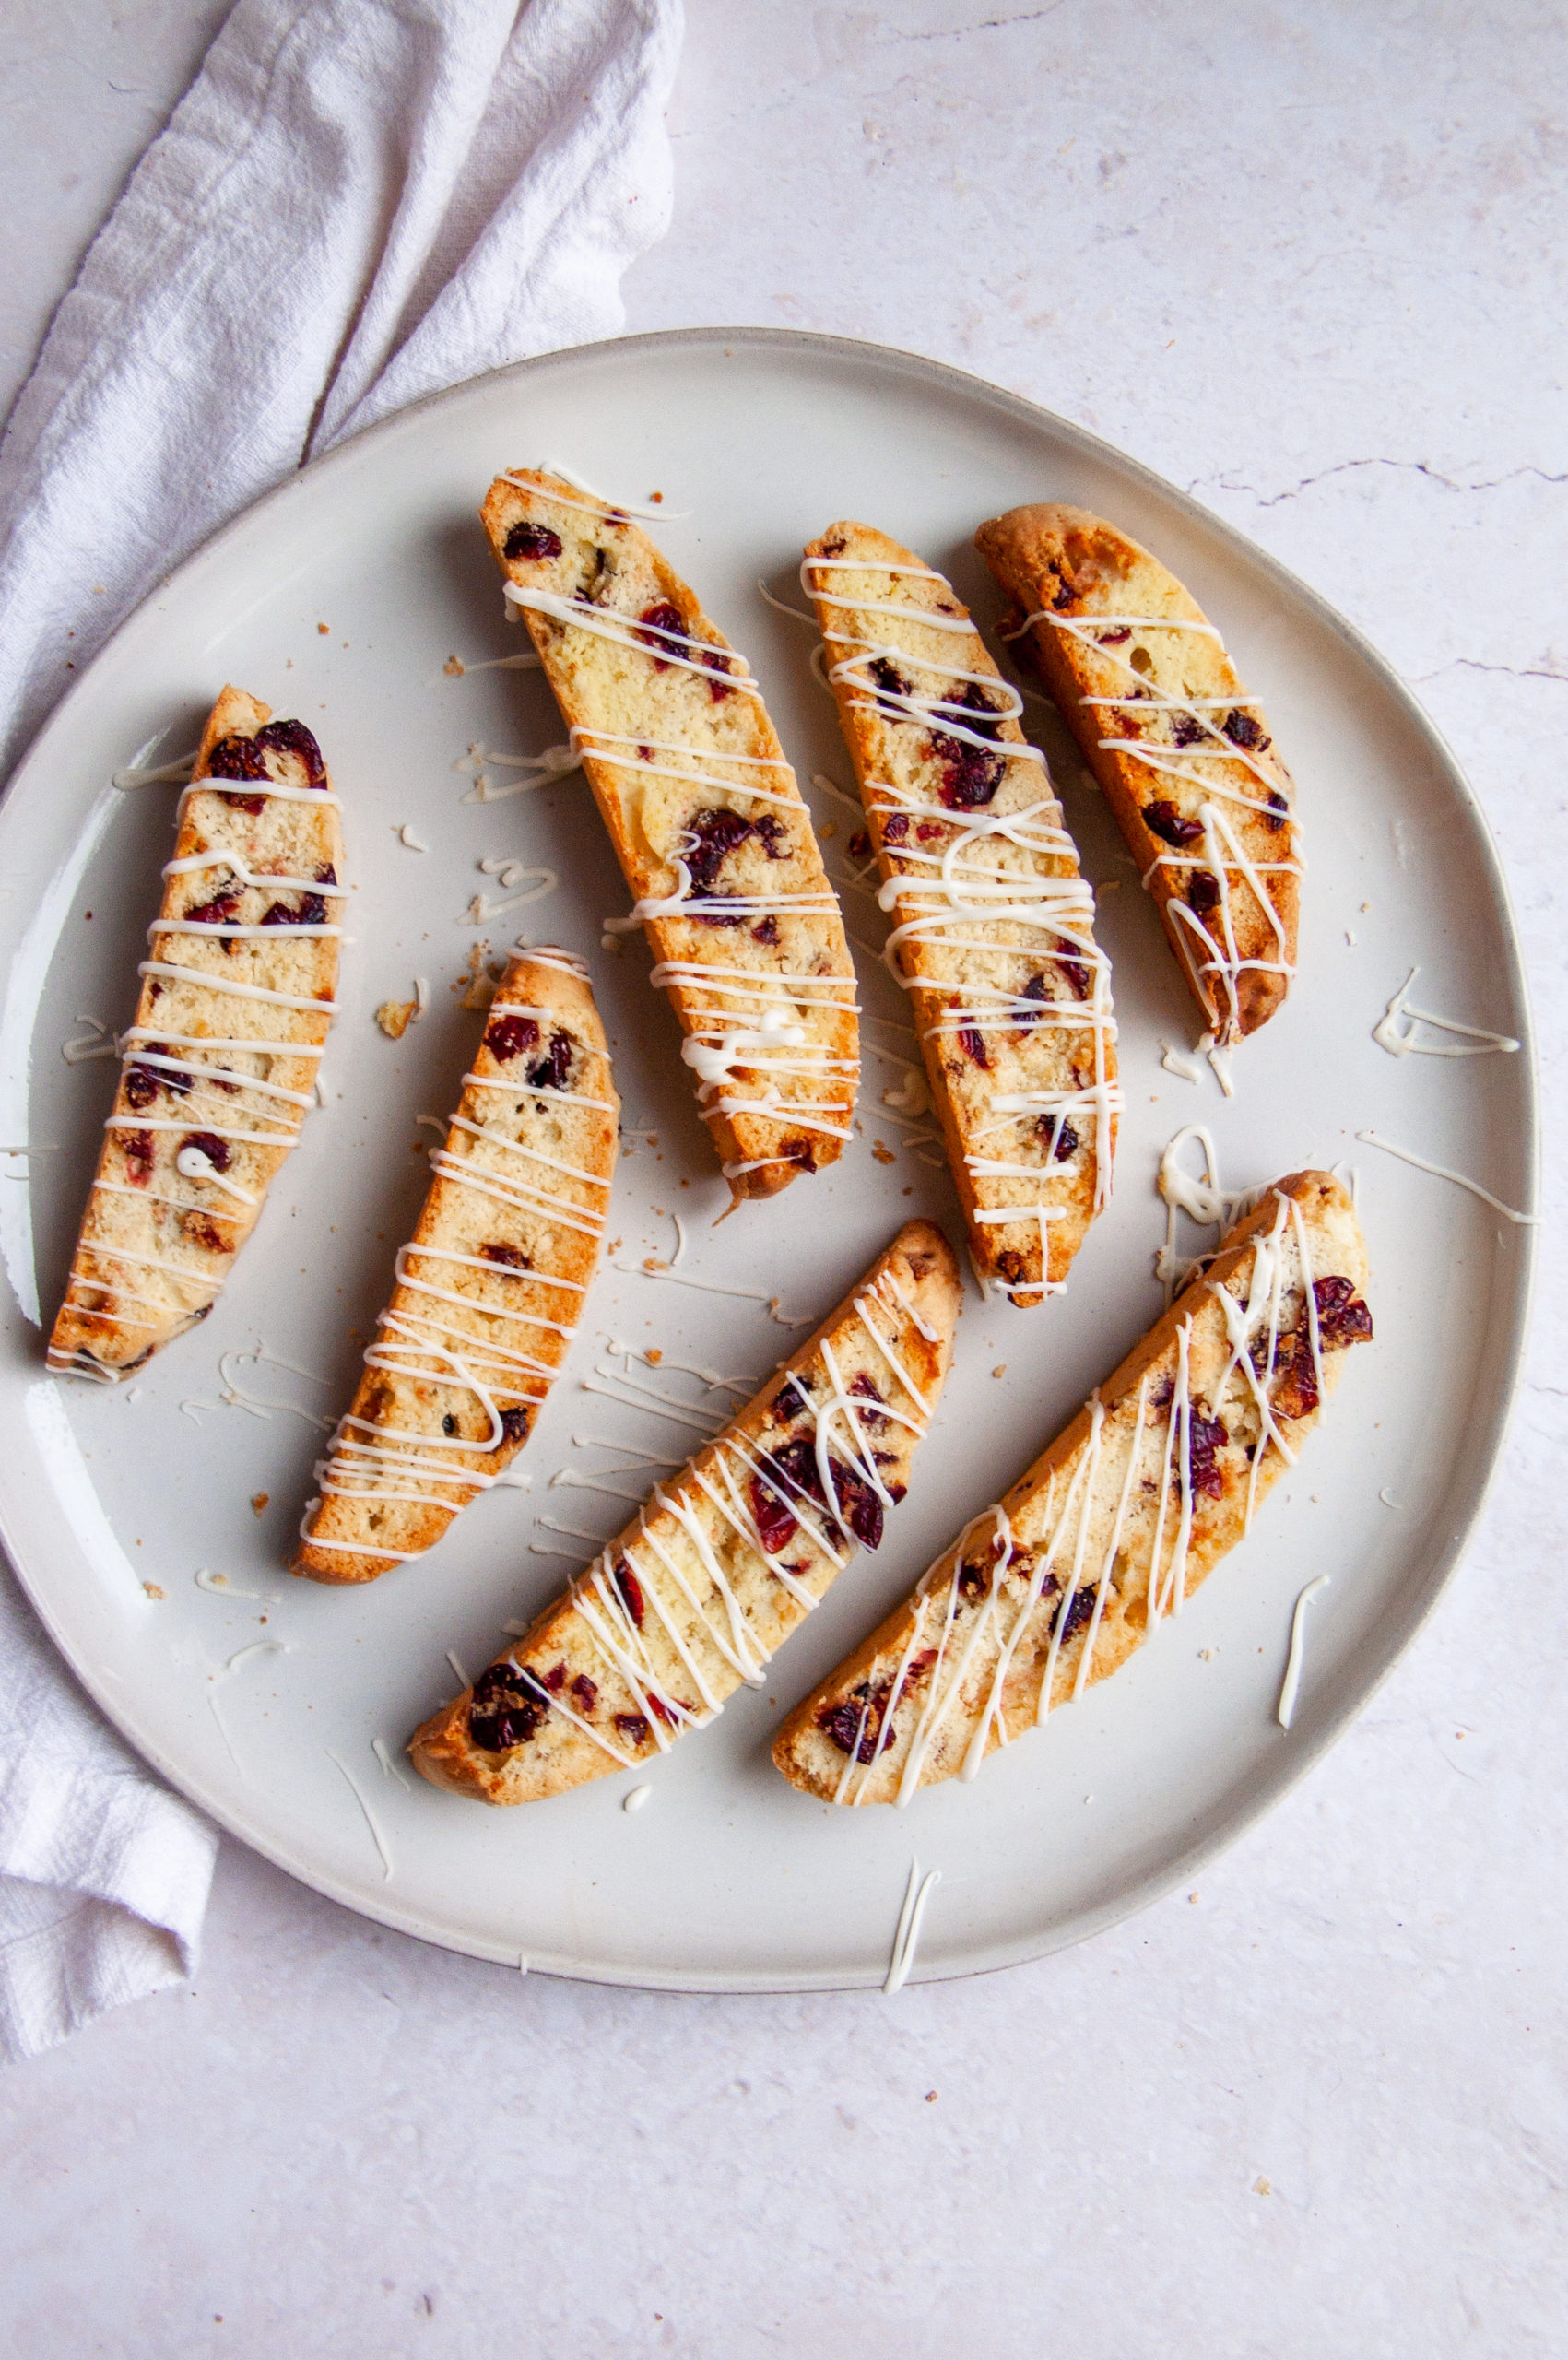 All the biscotti laid out on a white plate drizzled with white chocolate